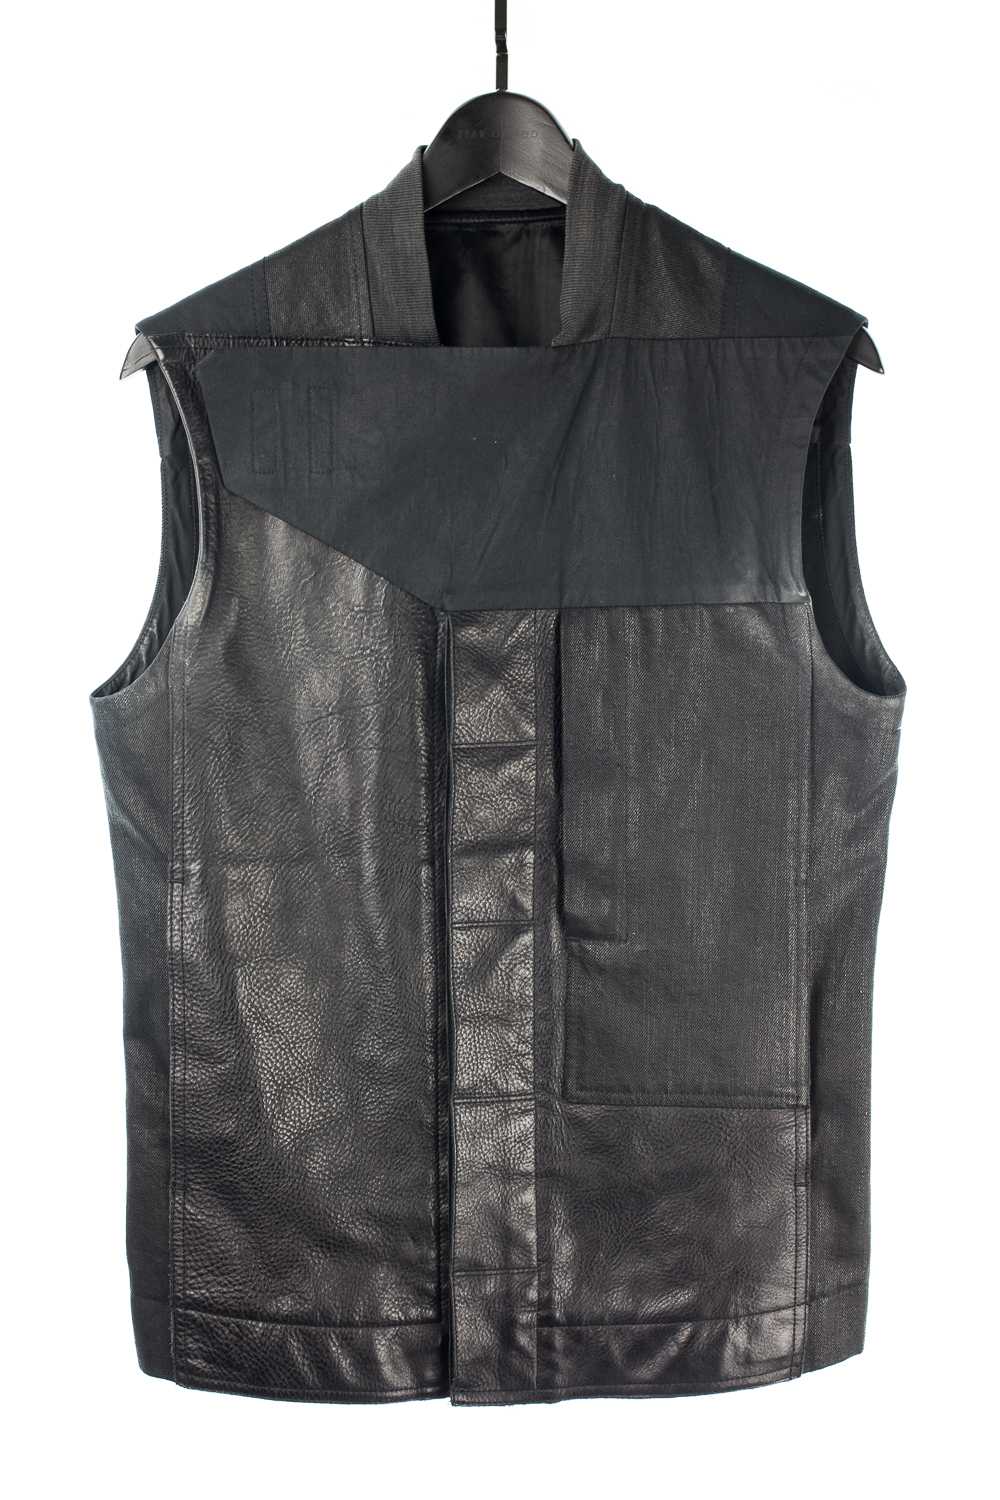 SS13 “Island” Leather/Cotton Fitted Jungle Vest - image 3